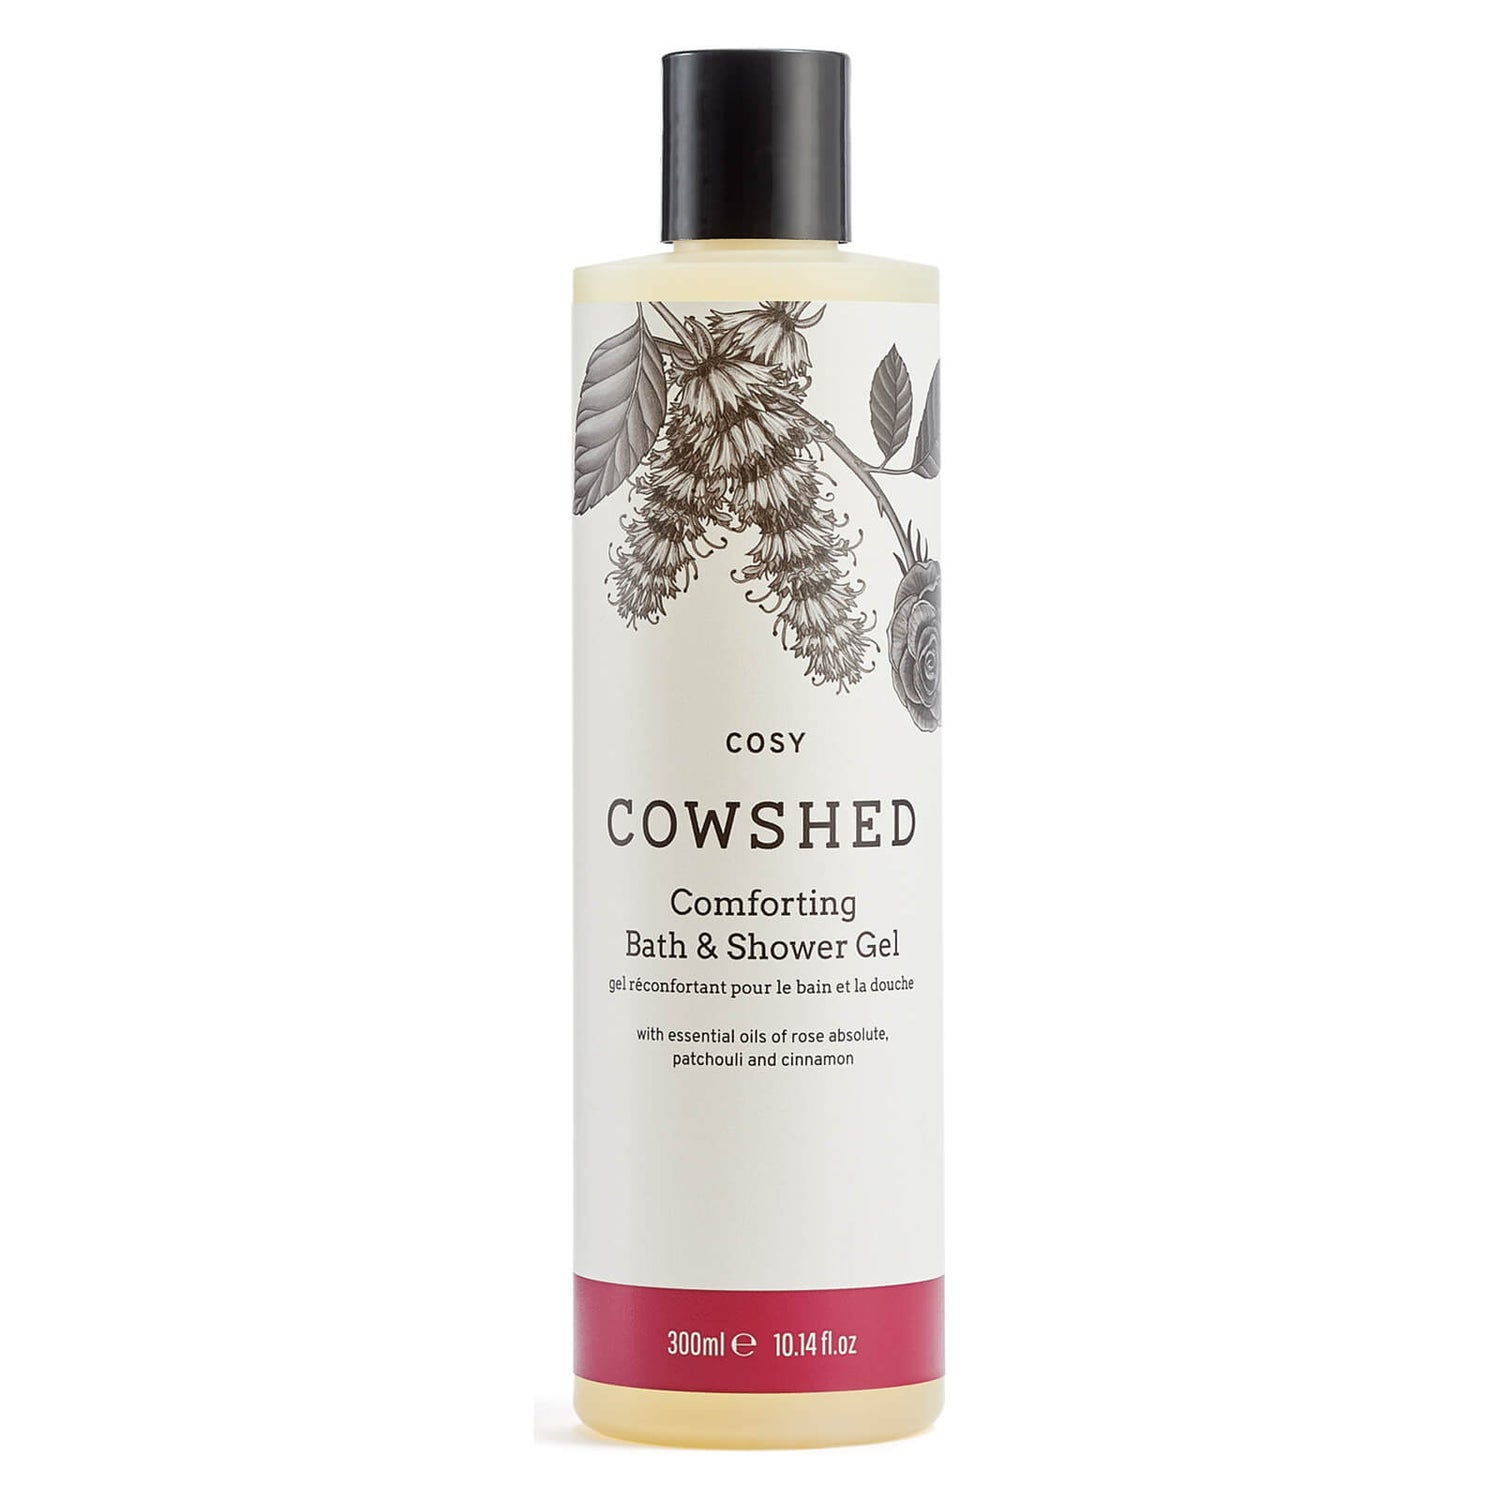 Cowshed COSY Comforting Bath & Shower Gel 300ml